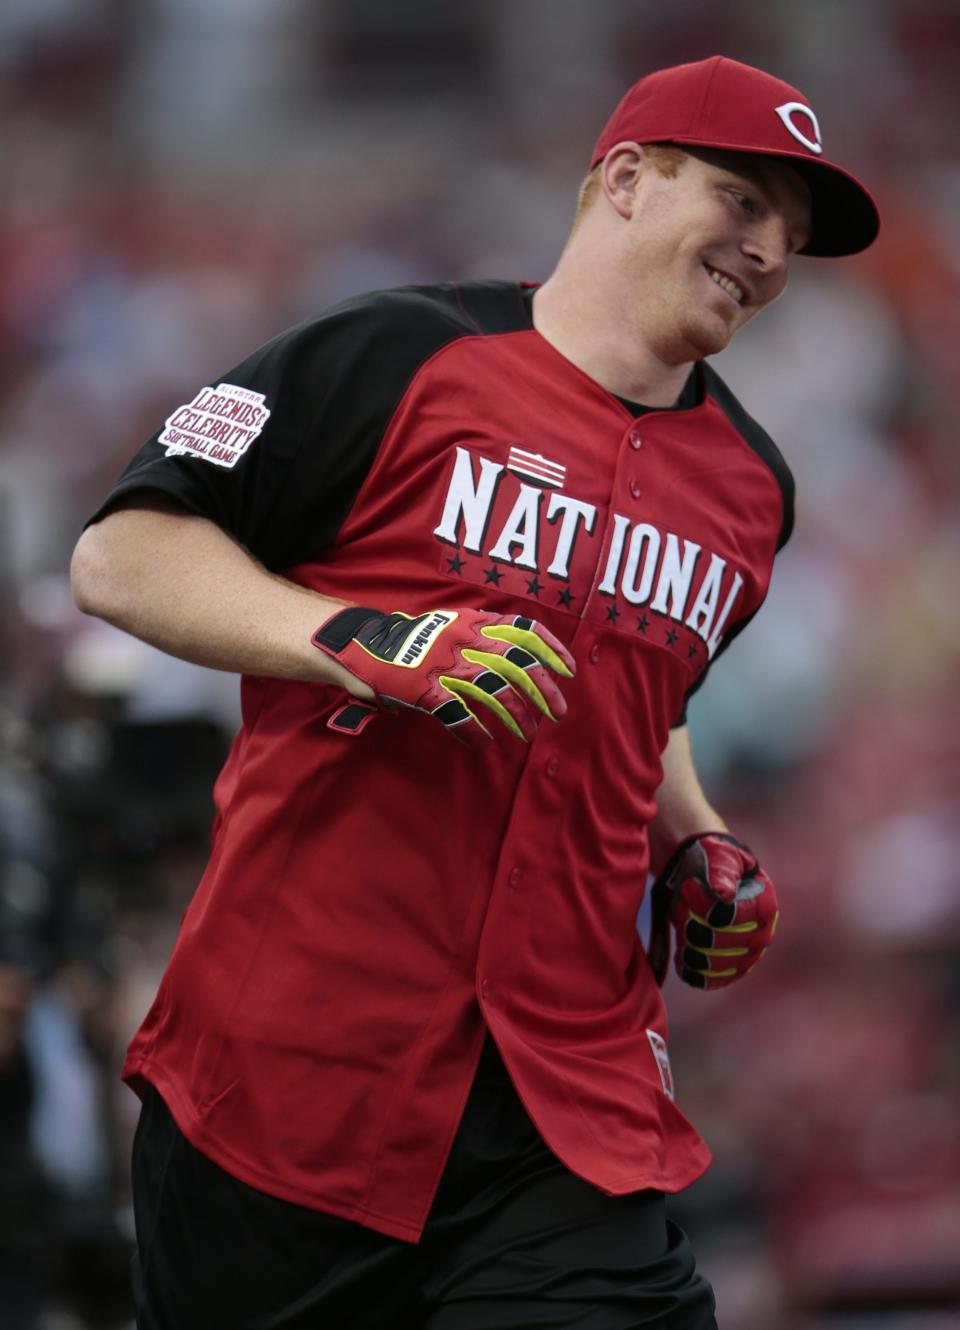 Andy Dalton rounds the bases on a home run during the Legends and Celebrity Softball Game at Great American Ballpark on Sunday, July 12, 2015.